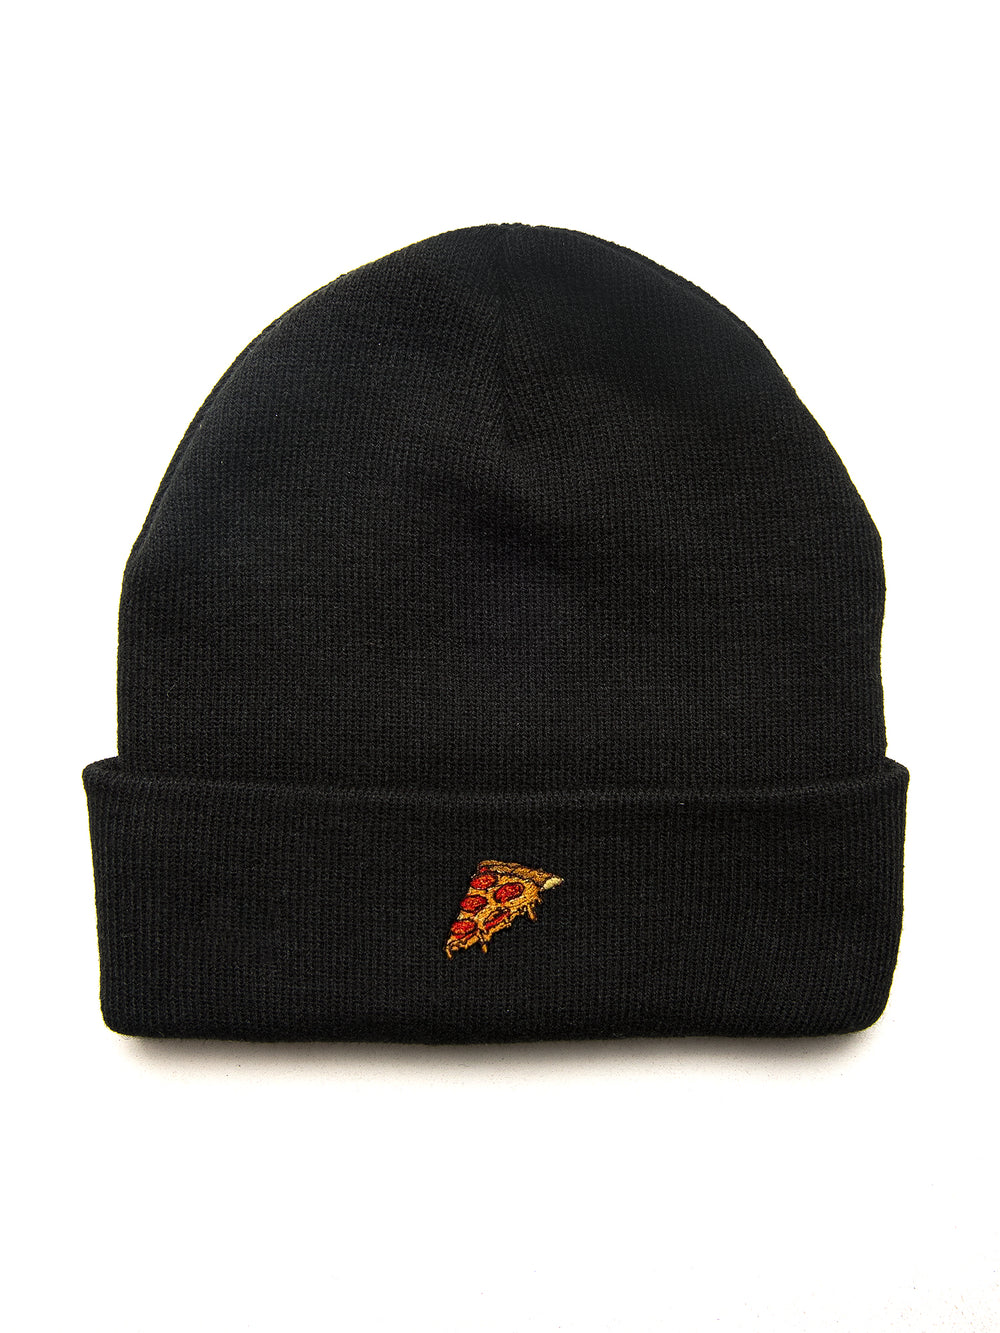 KOLBY EMBROIDERED BEANIE